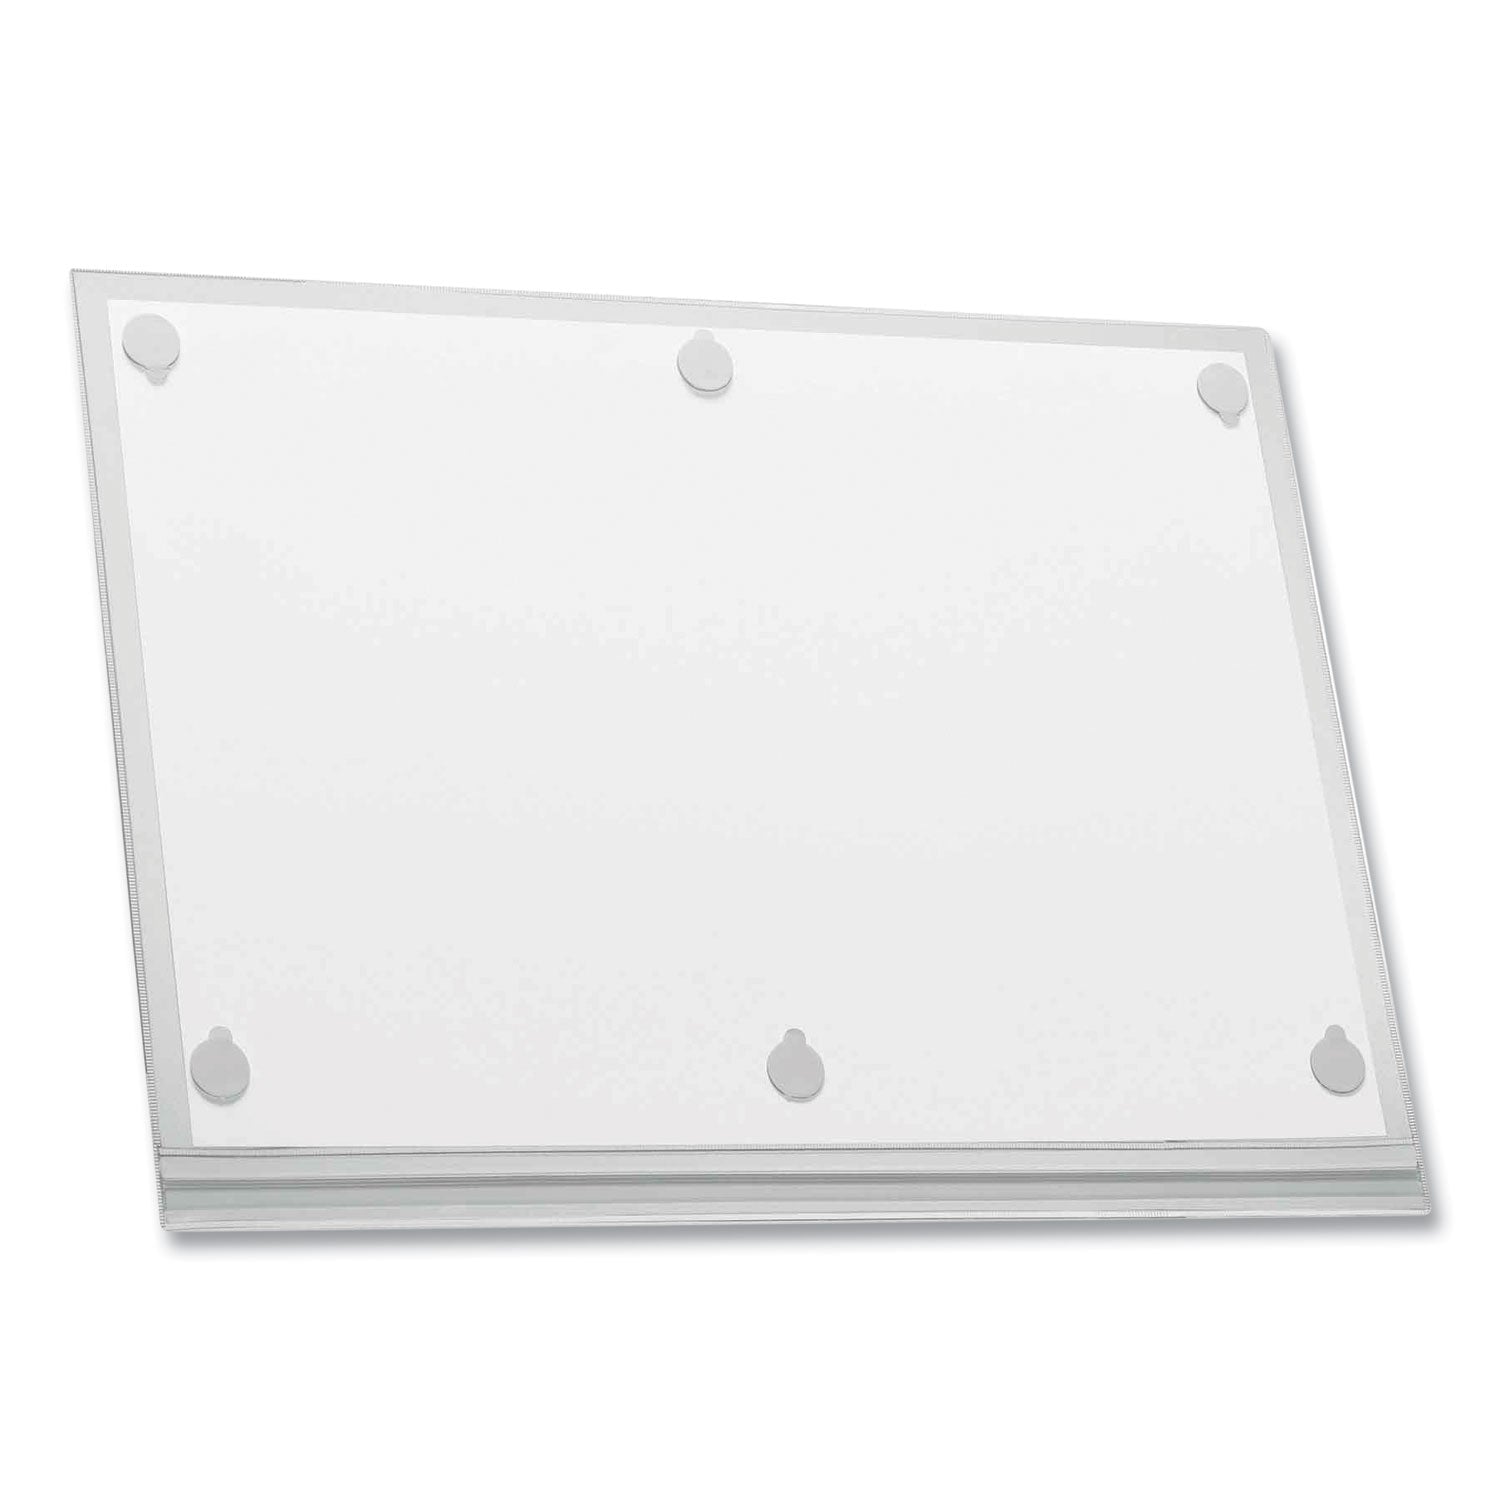 self-adhesive-water-resistant-sign-holder-11-x-17-clear-frame-5-pack_dbl501719 - 3